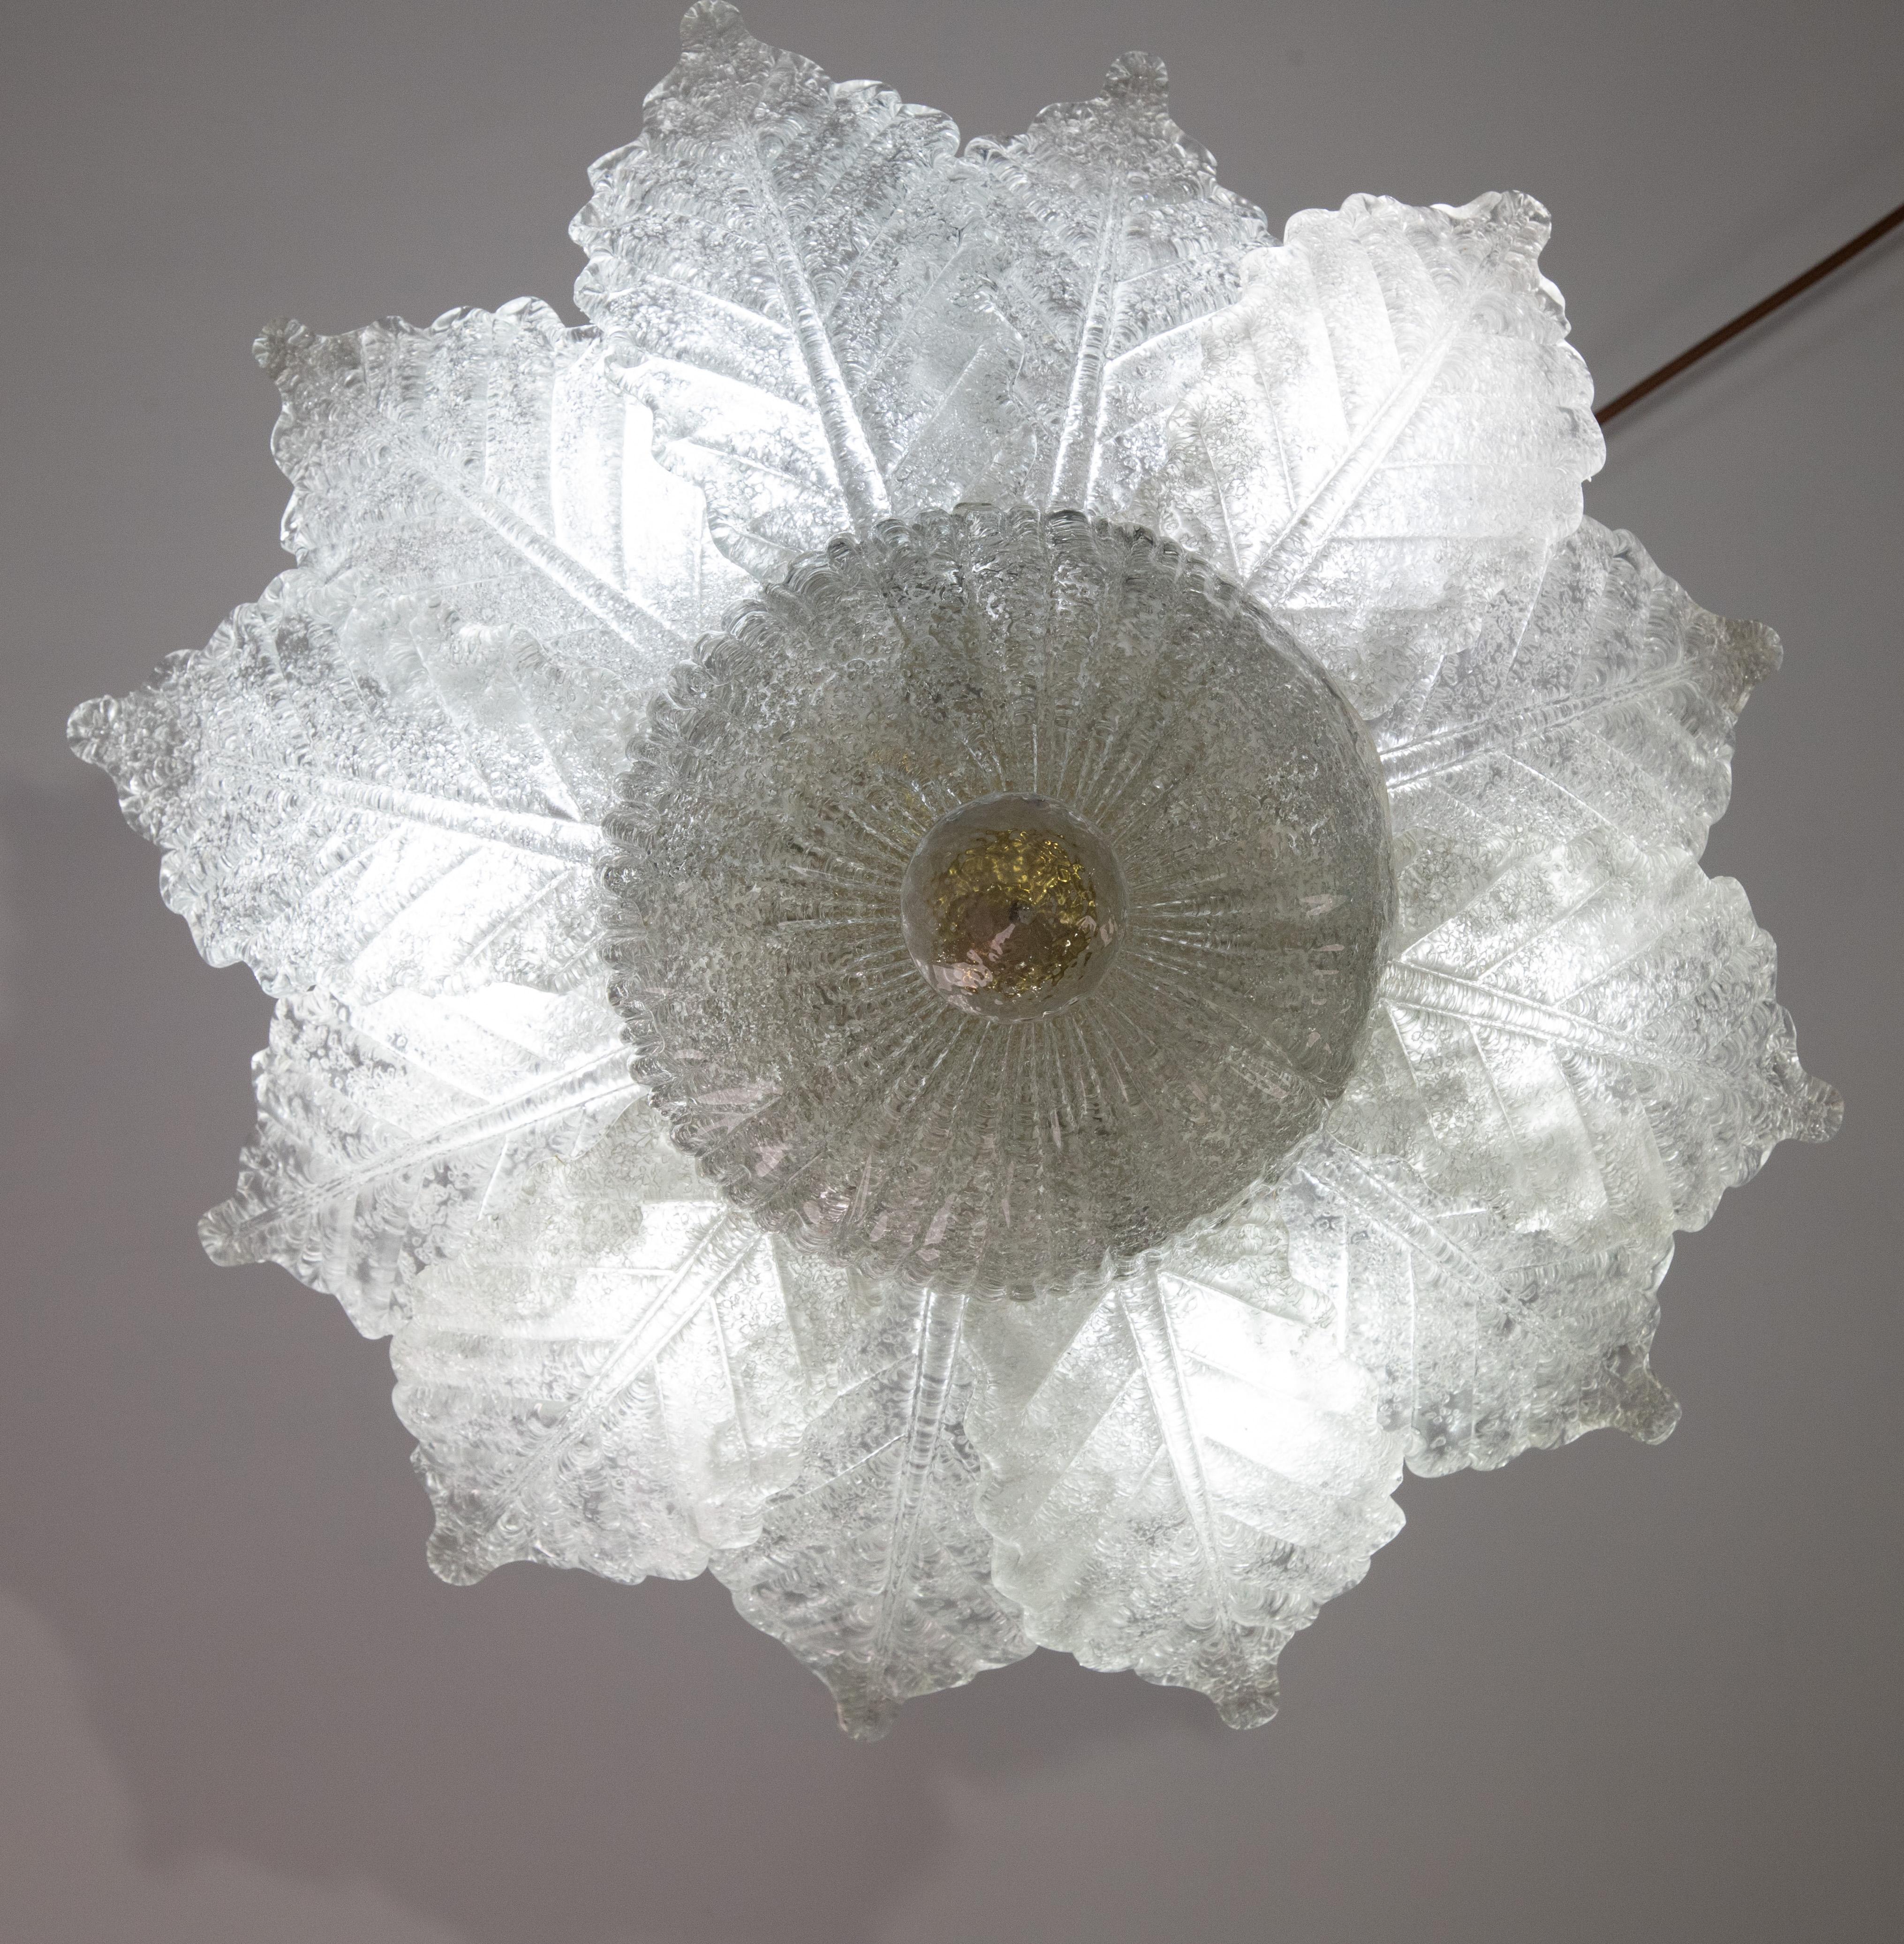 Splendid Murano glass ceiling lamp.

Period: circa 1970.

The light mounts 6 standard European e14 lamp holders.

Height measures 30 centimeters from the ceiling, diameter about 50 centimeters.